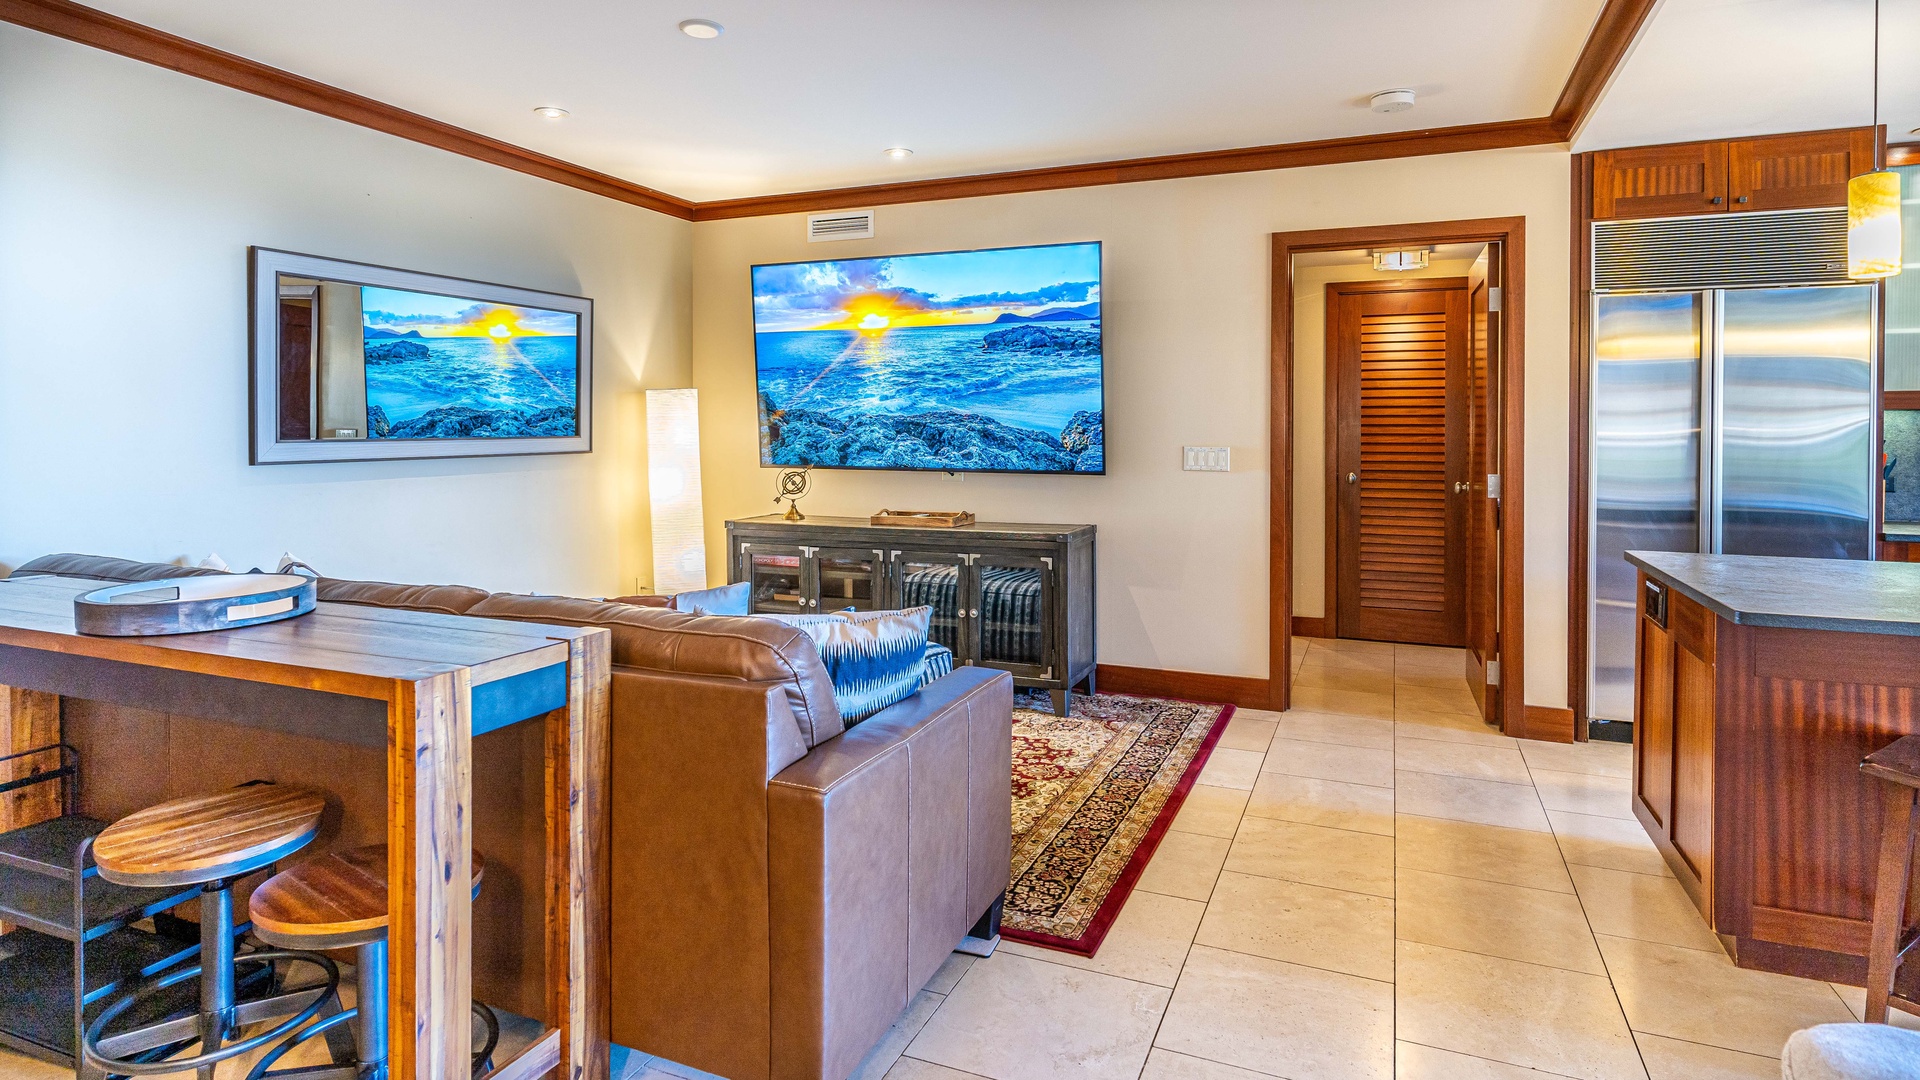 Kapolei Vacation Rentals, Ko Olina Beach Villas B102 - Another view of the living area with TV.